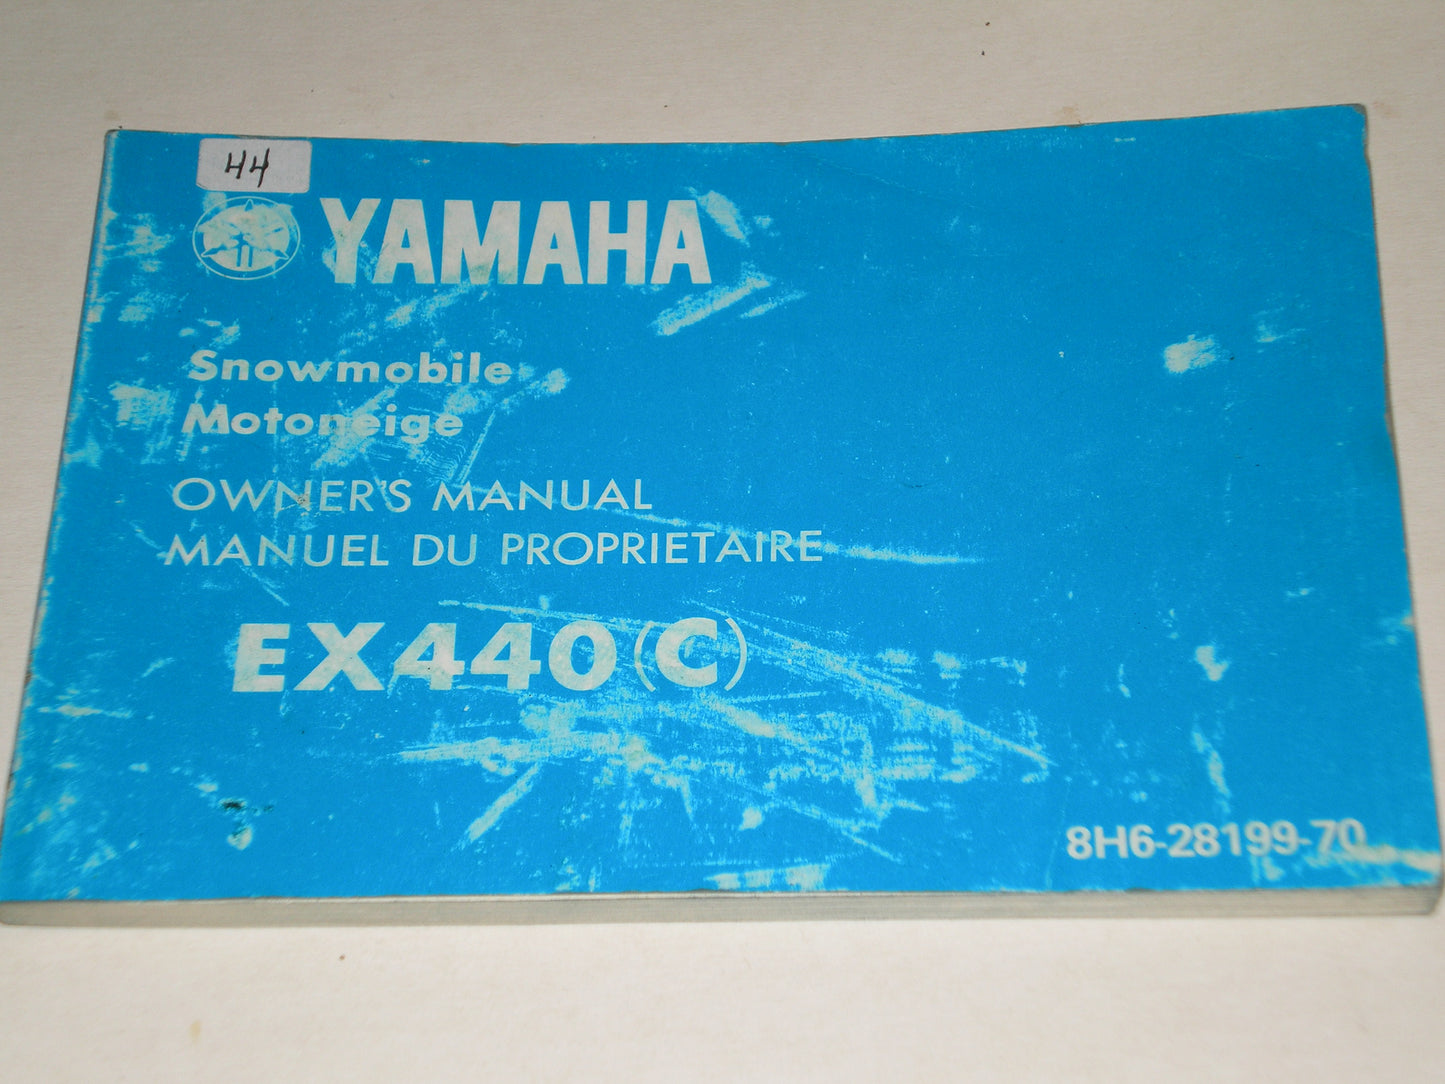 YAMAHA EX440 C Snowmobile Owner's Manual 8H6-28199-70  #A44